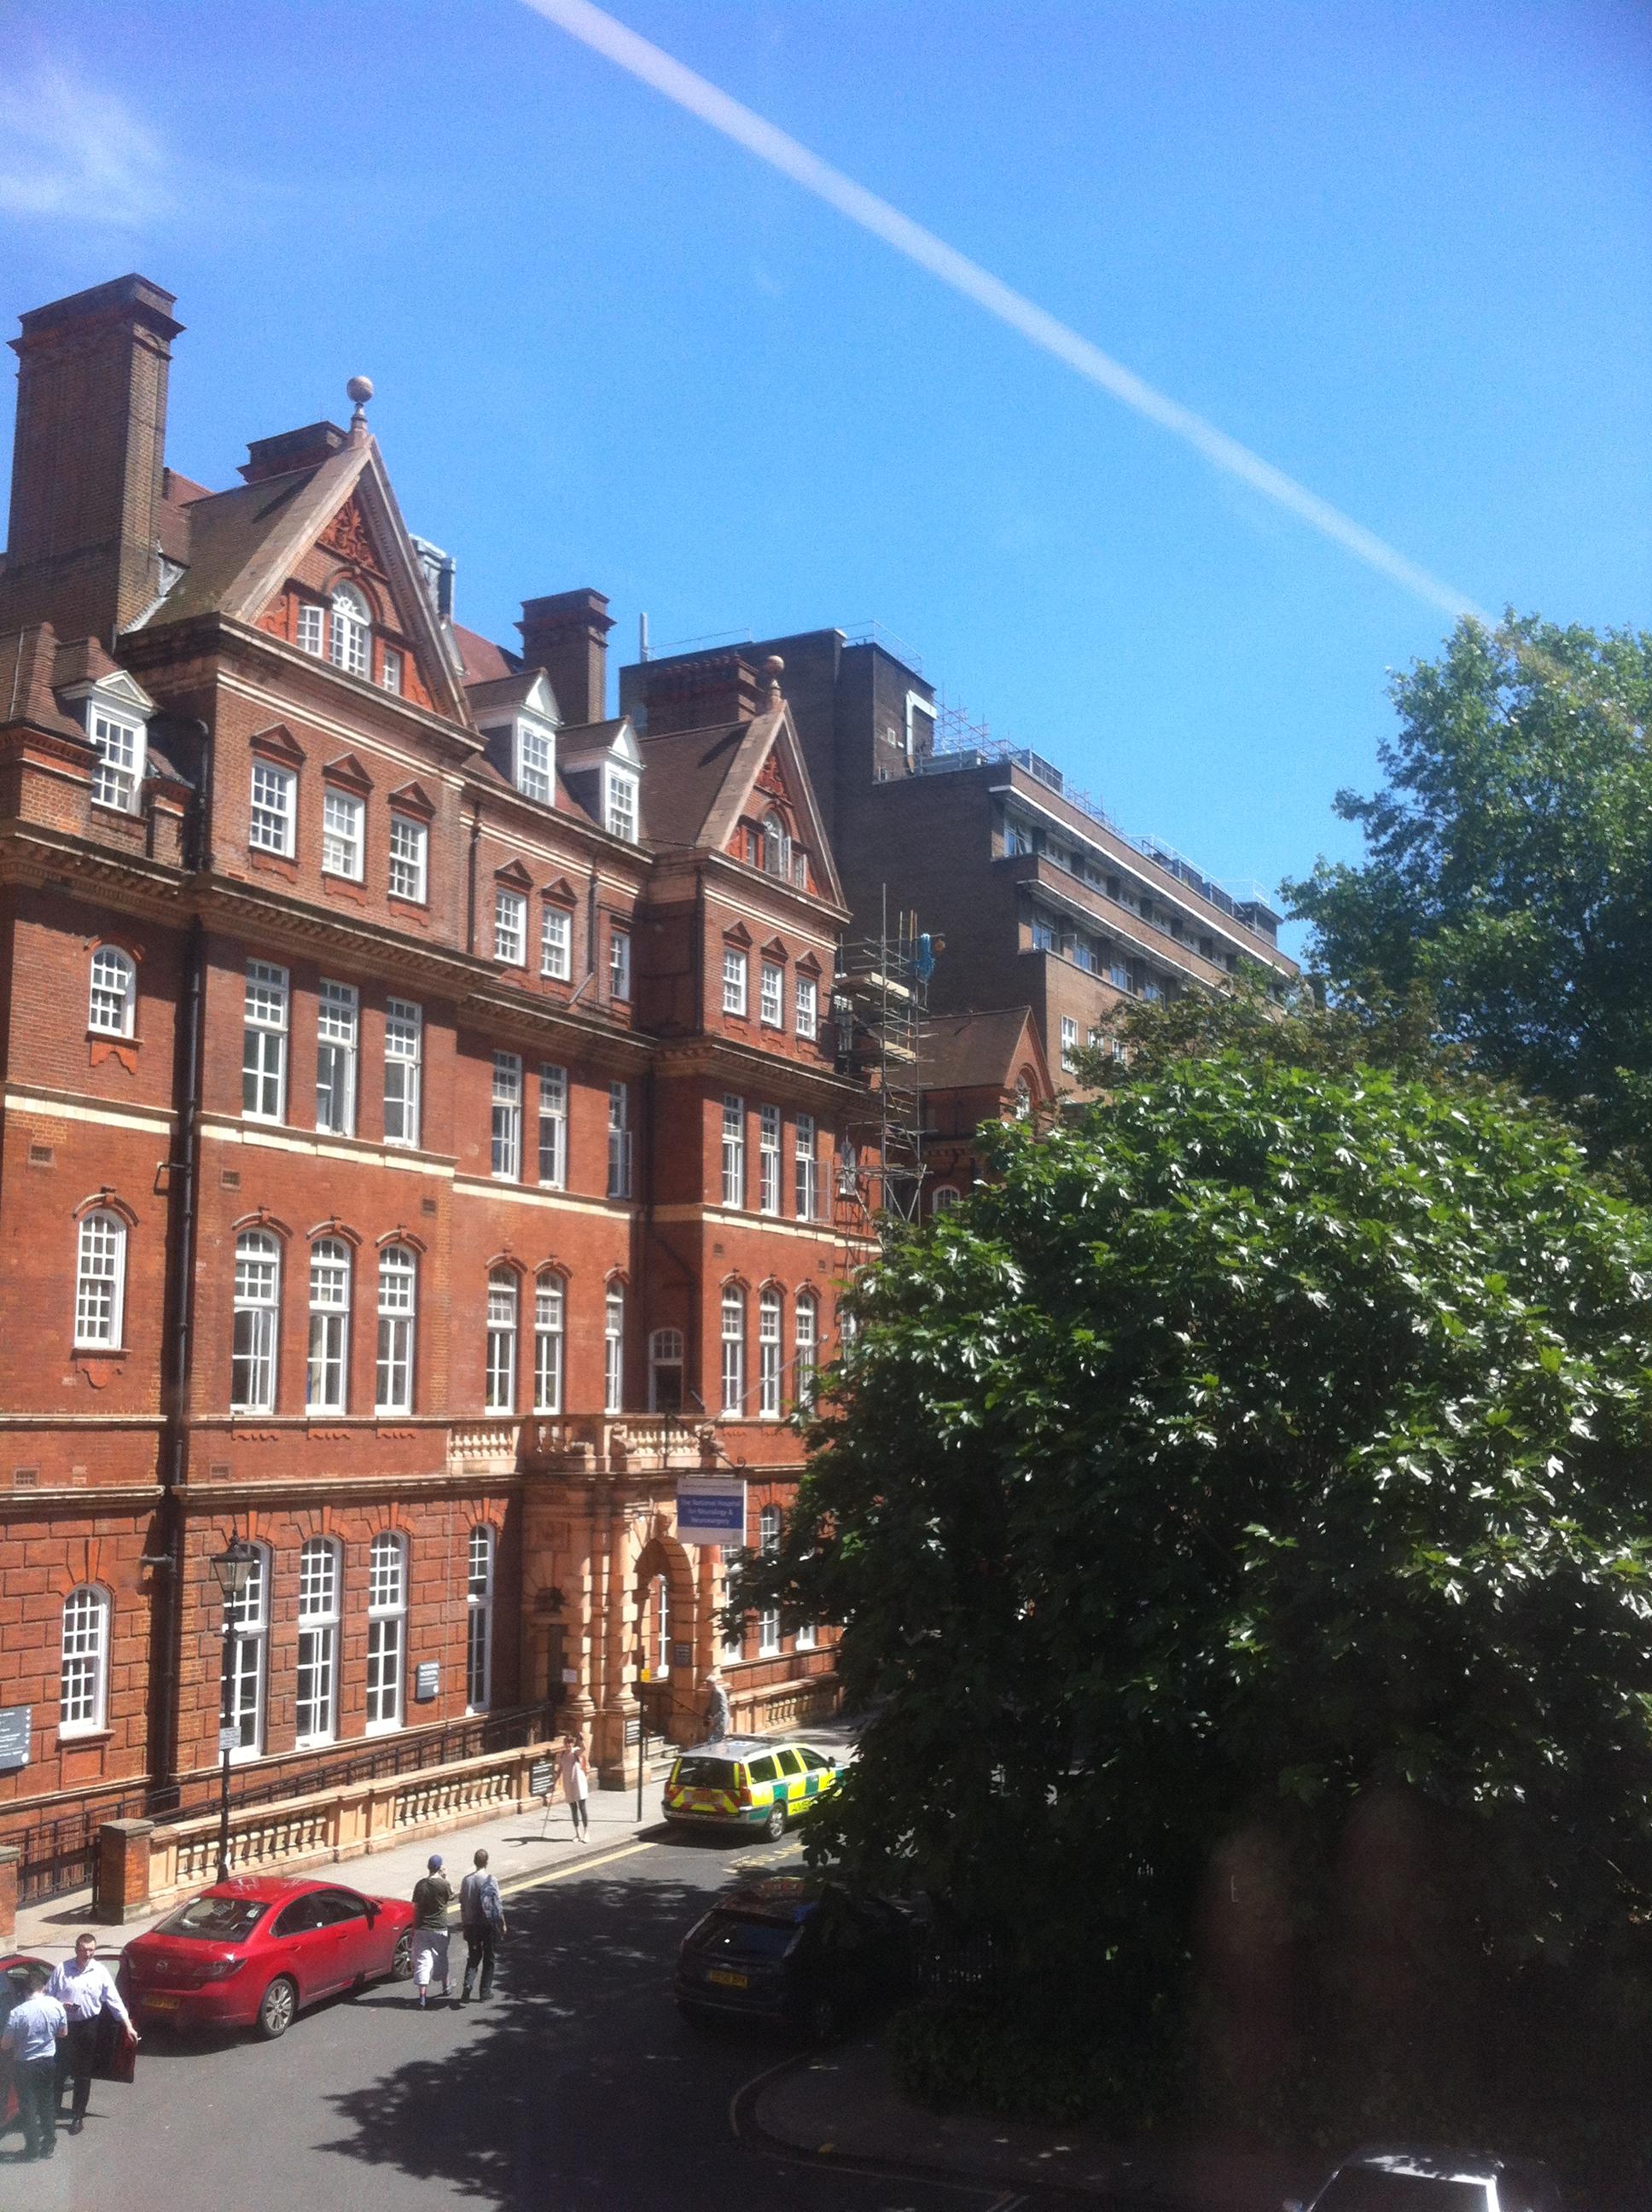 The National Hospital for Neurology & Neurosurgery in London's Queen Square